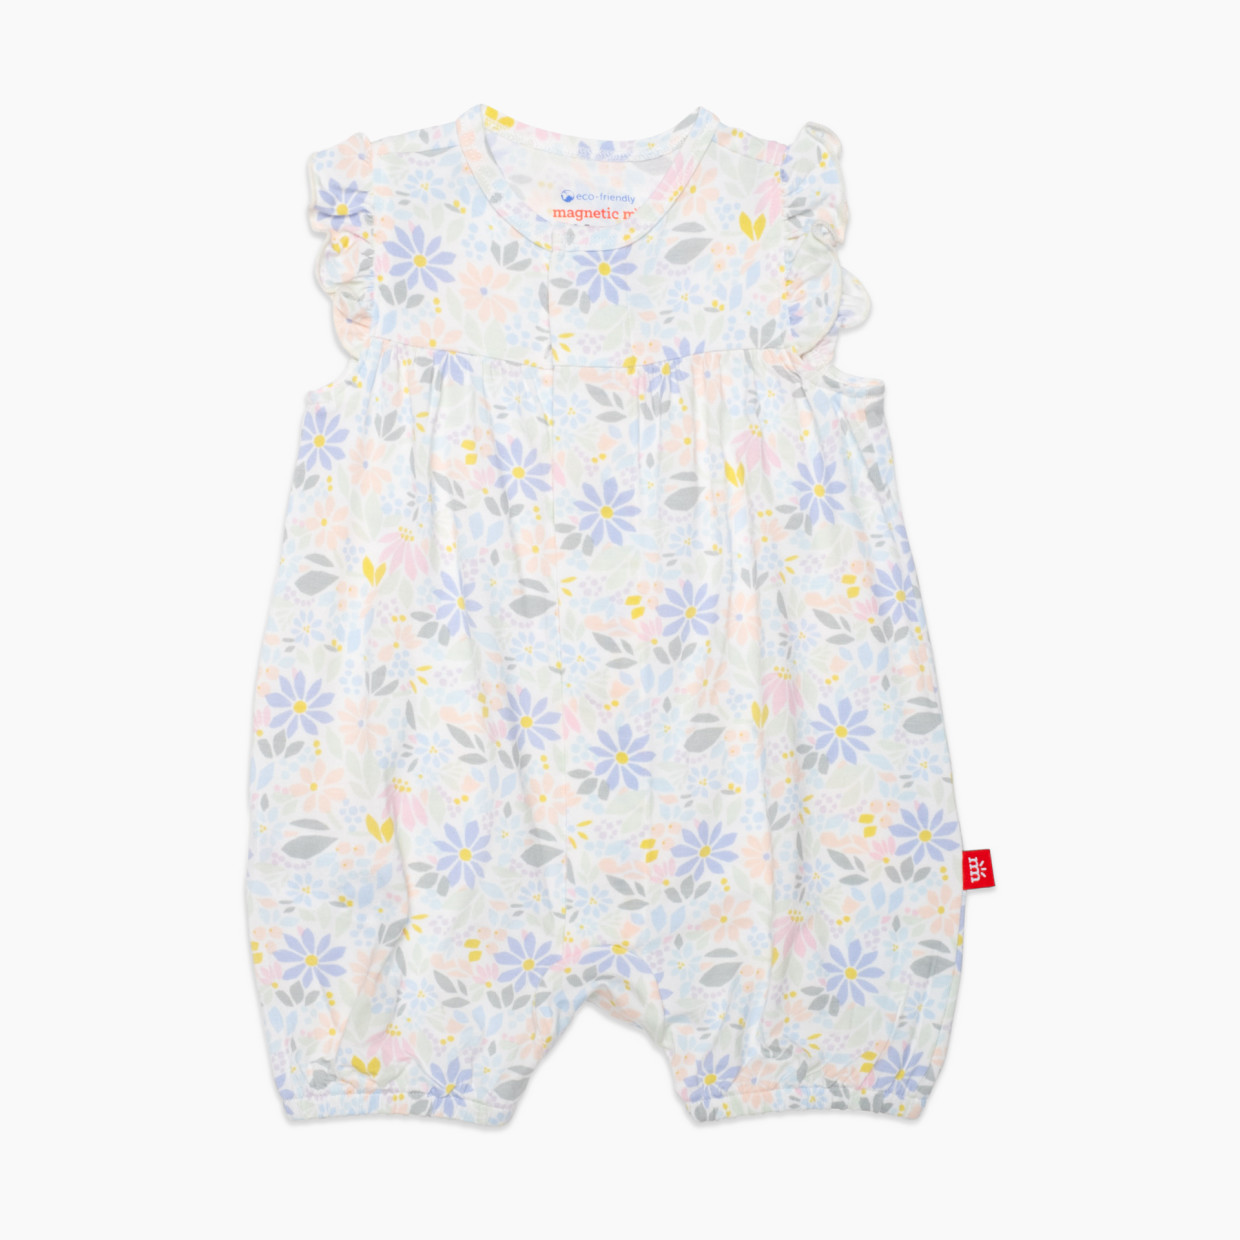 Magnetic Me Modal Magnetic Romper - Darby, 0-3 M.